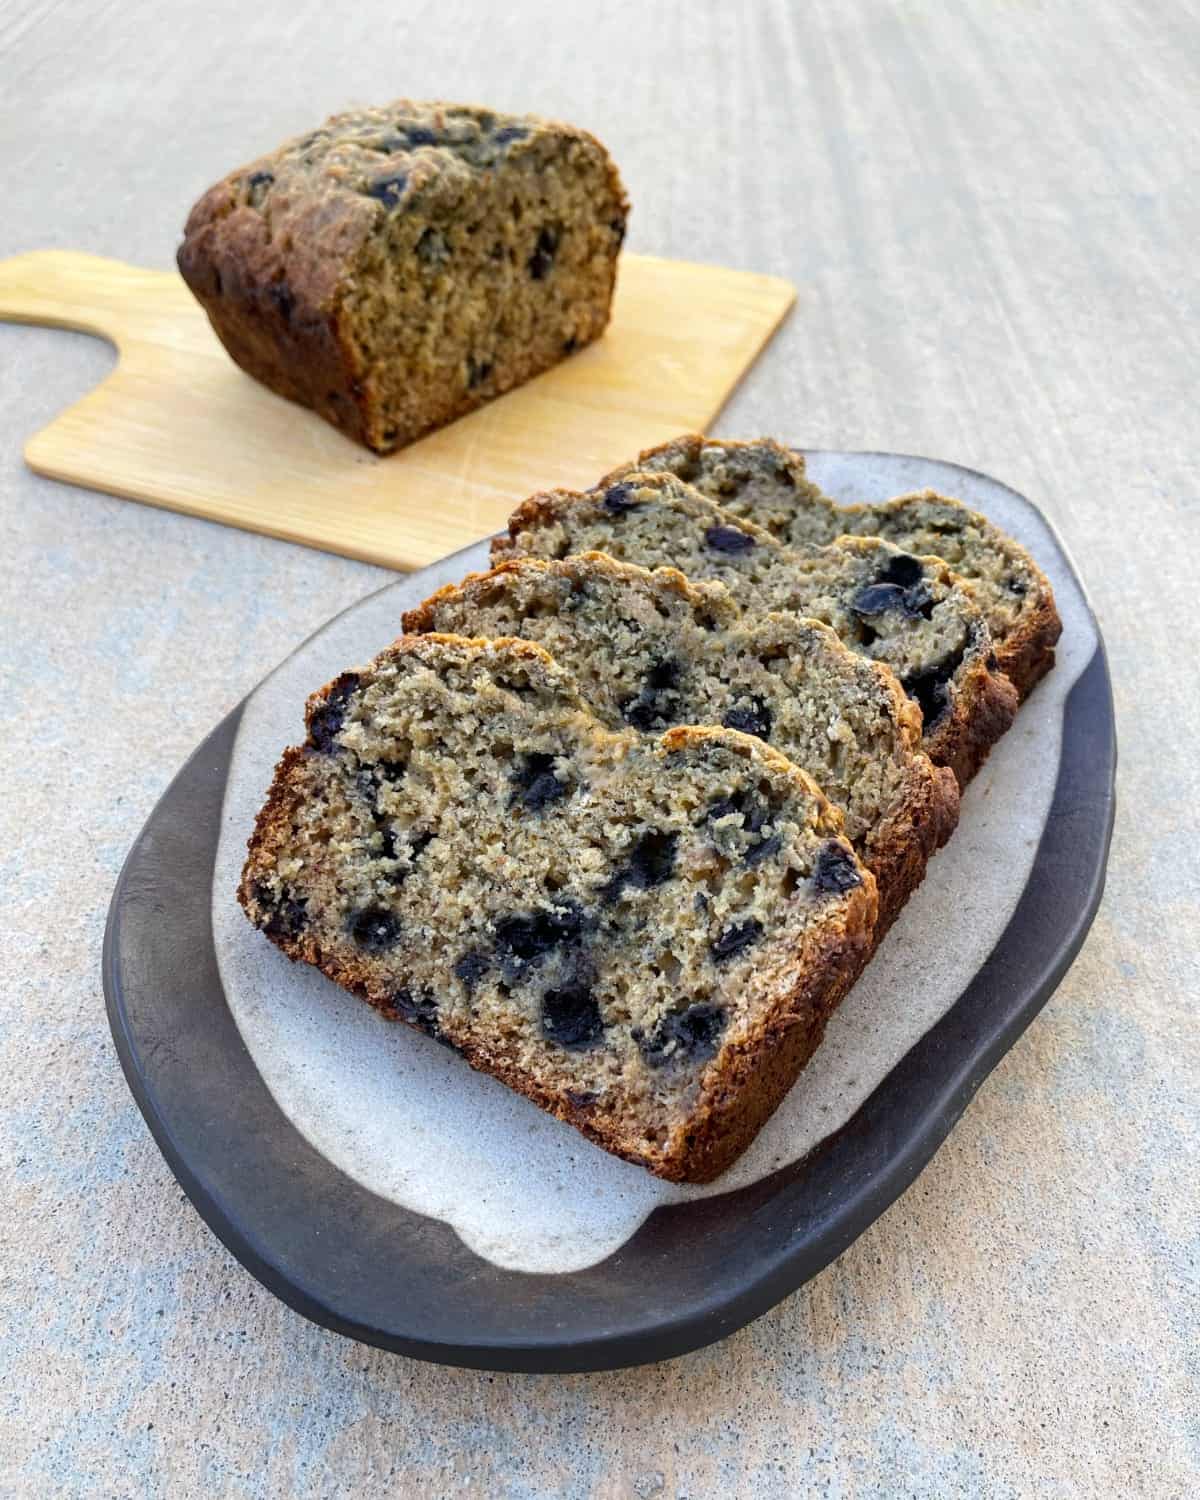 Blueberry banana bread slices on plate with half loaf on cutting board in background.